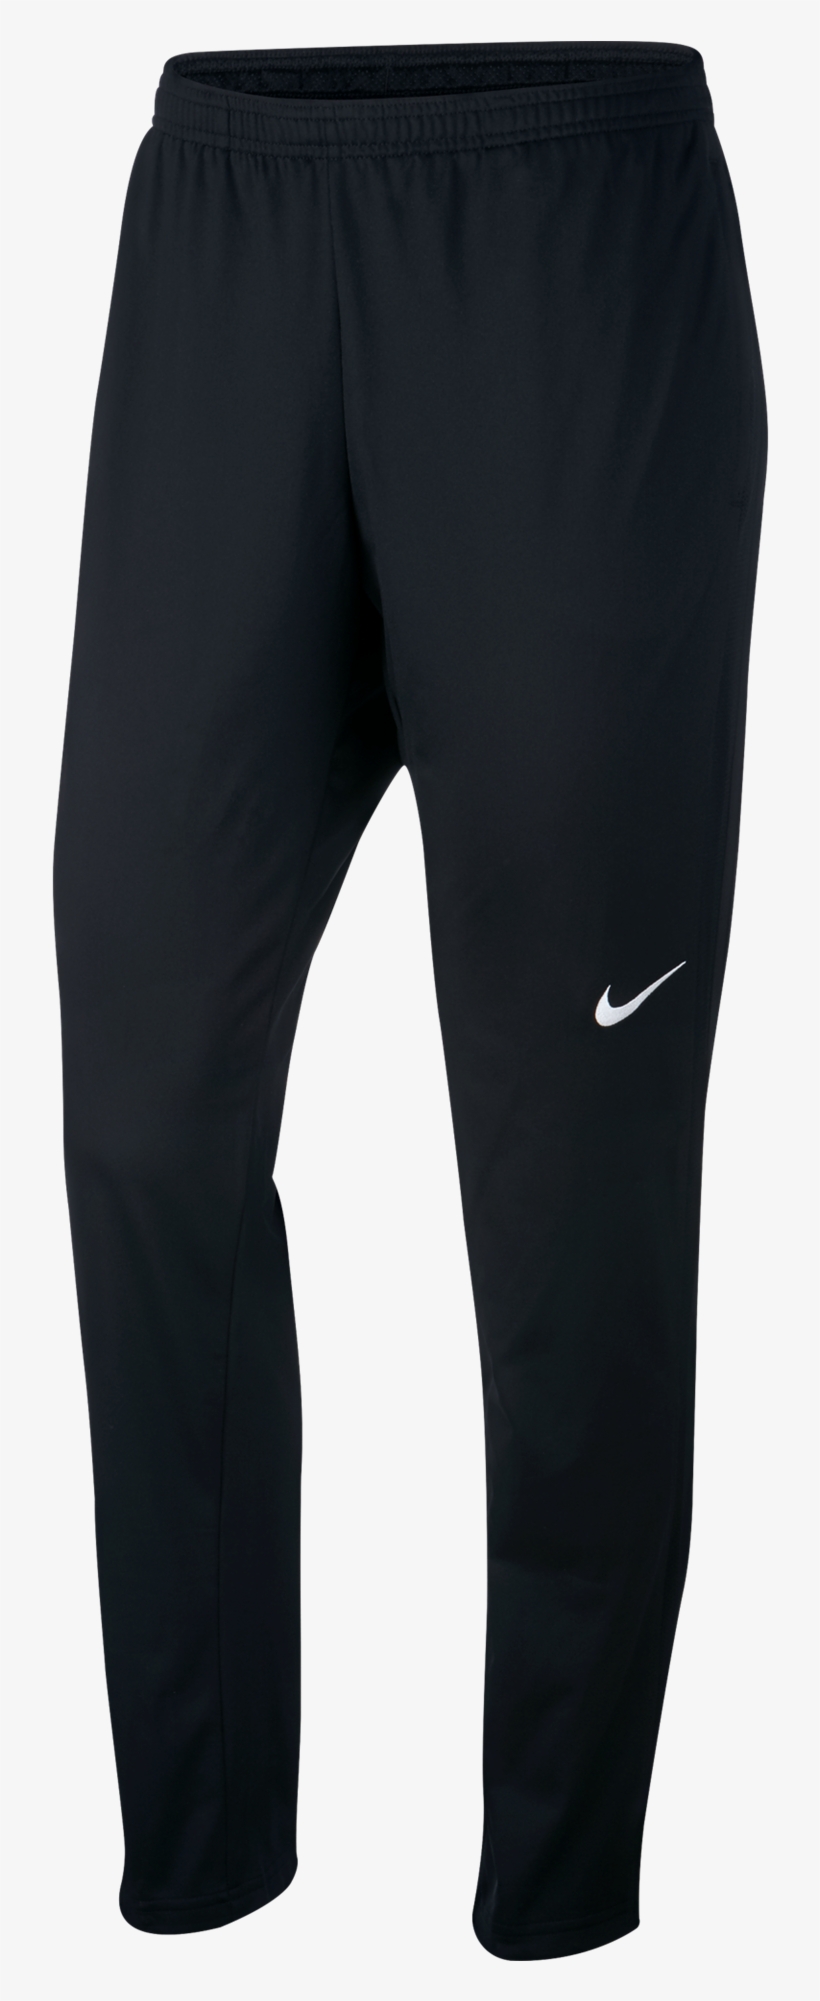 Picture Of Nike Women's Academy 18 Tech - Nike Bliss Victory Pants, transparent png #3888892